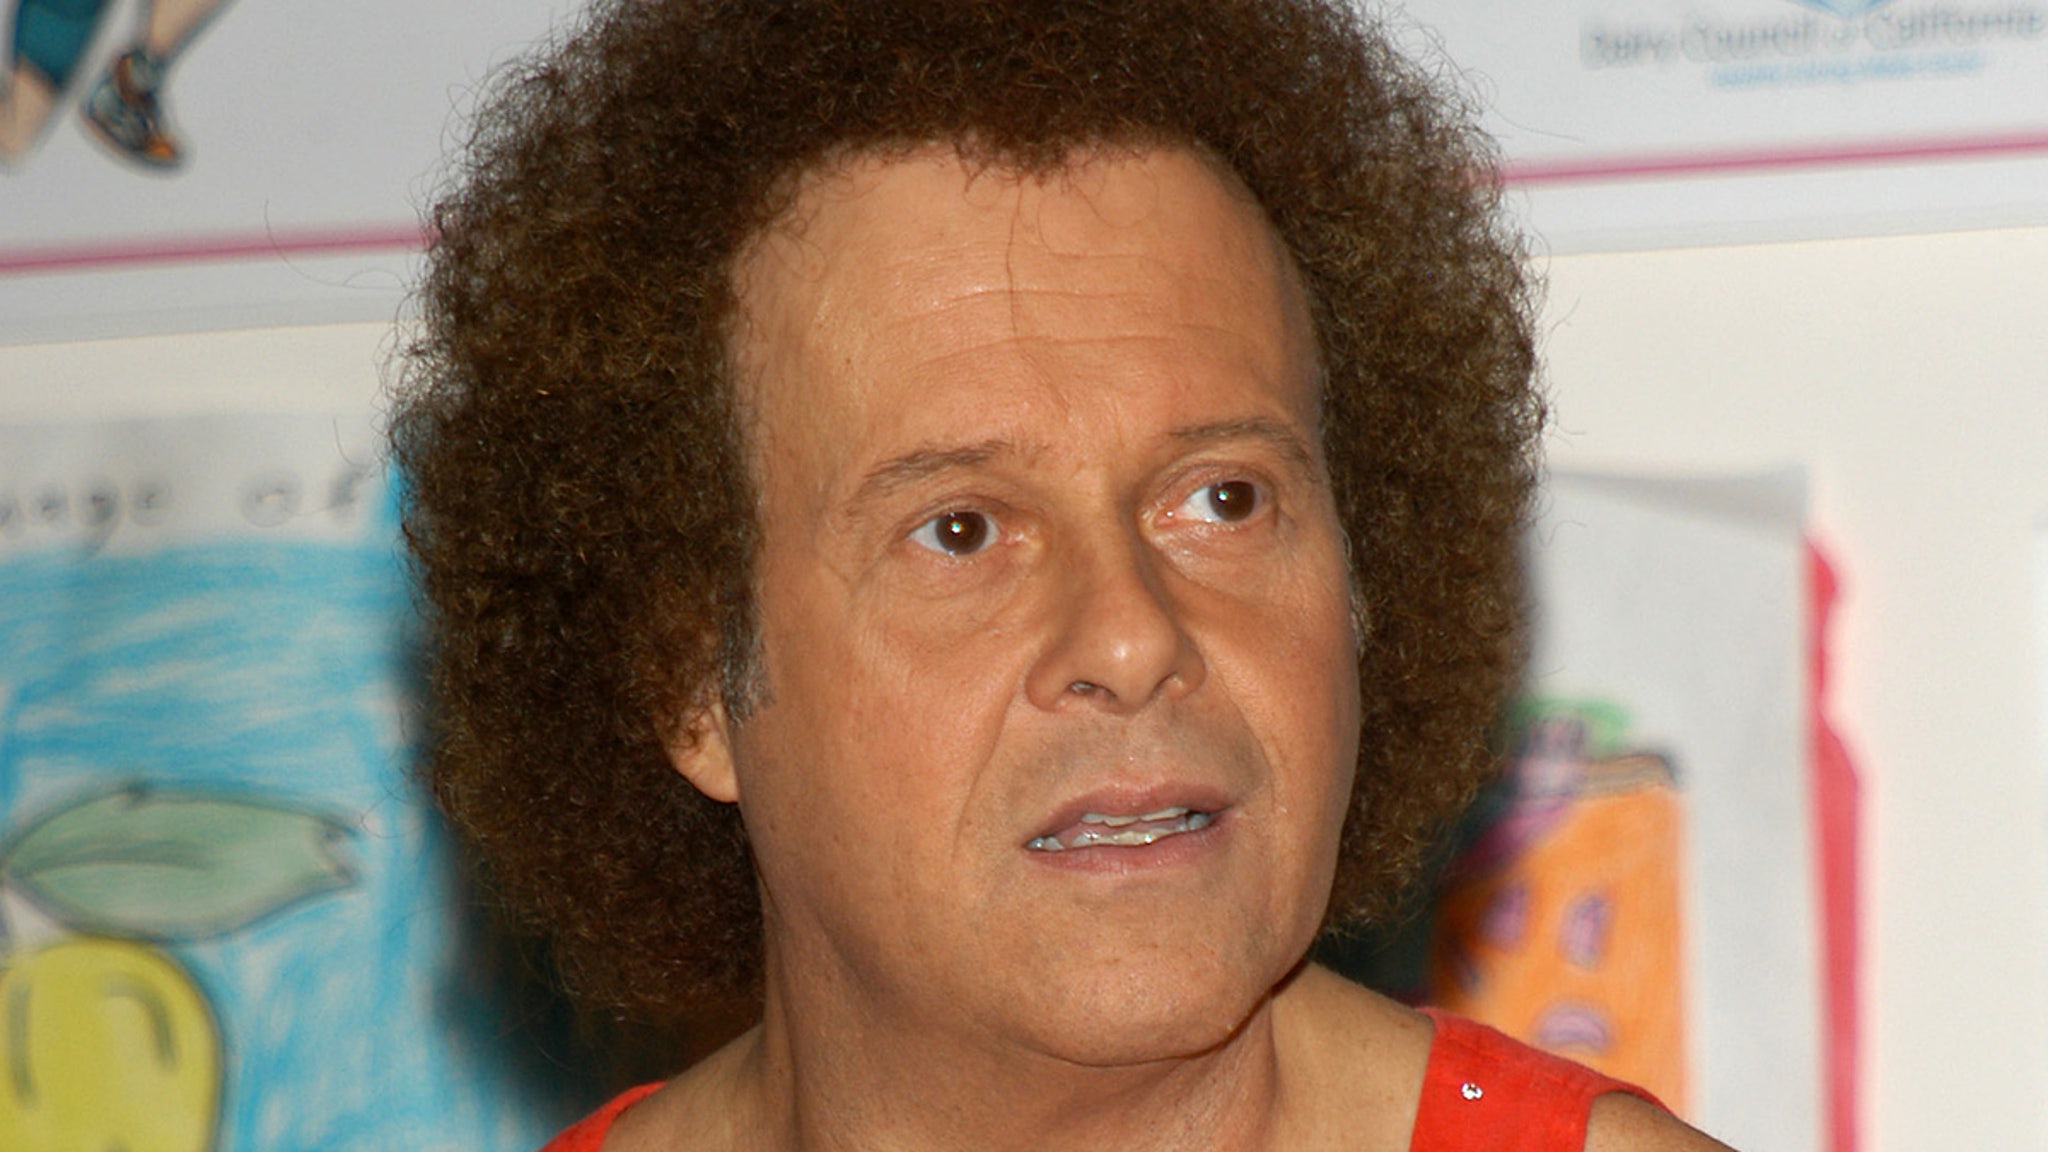 Cause of death of Richard Simmons still unknown, buried in LA